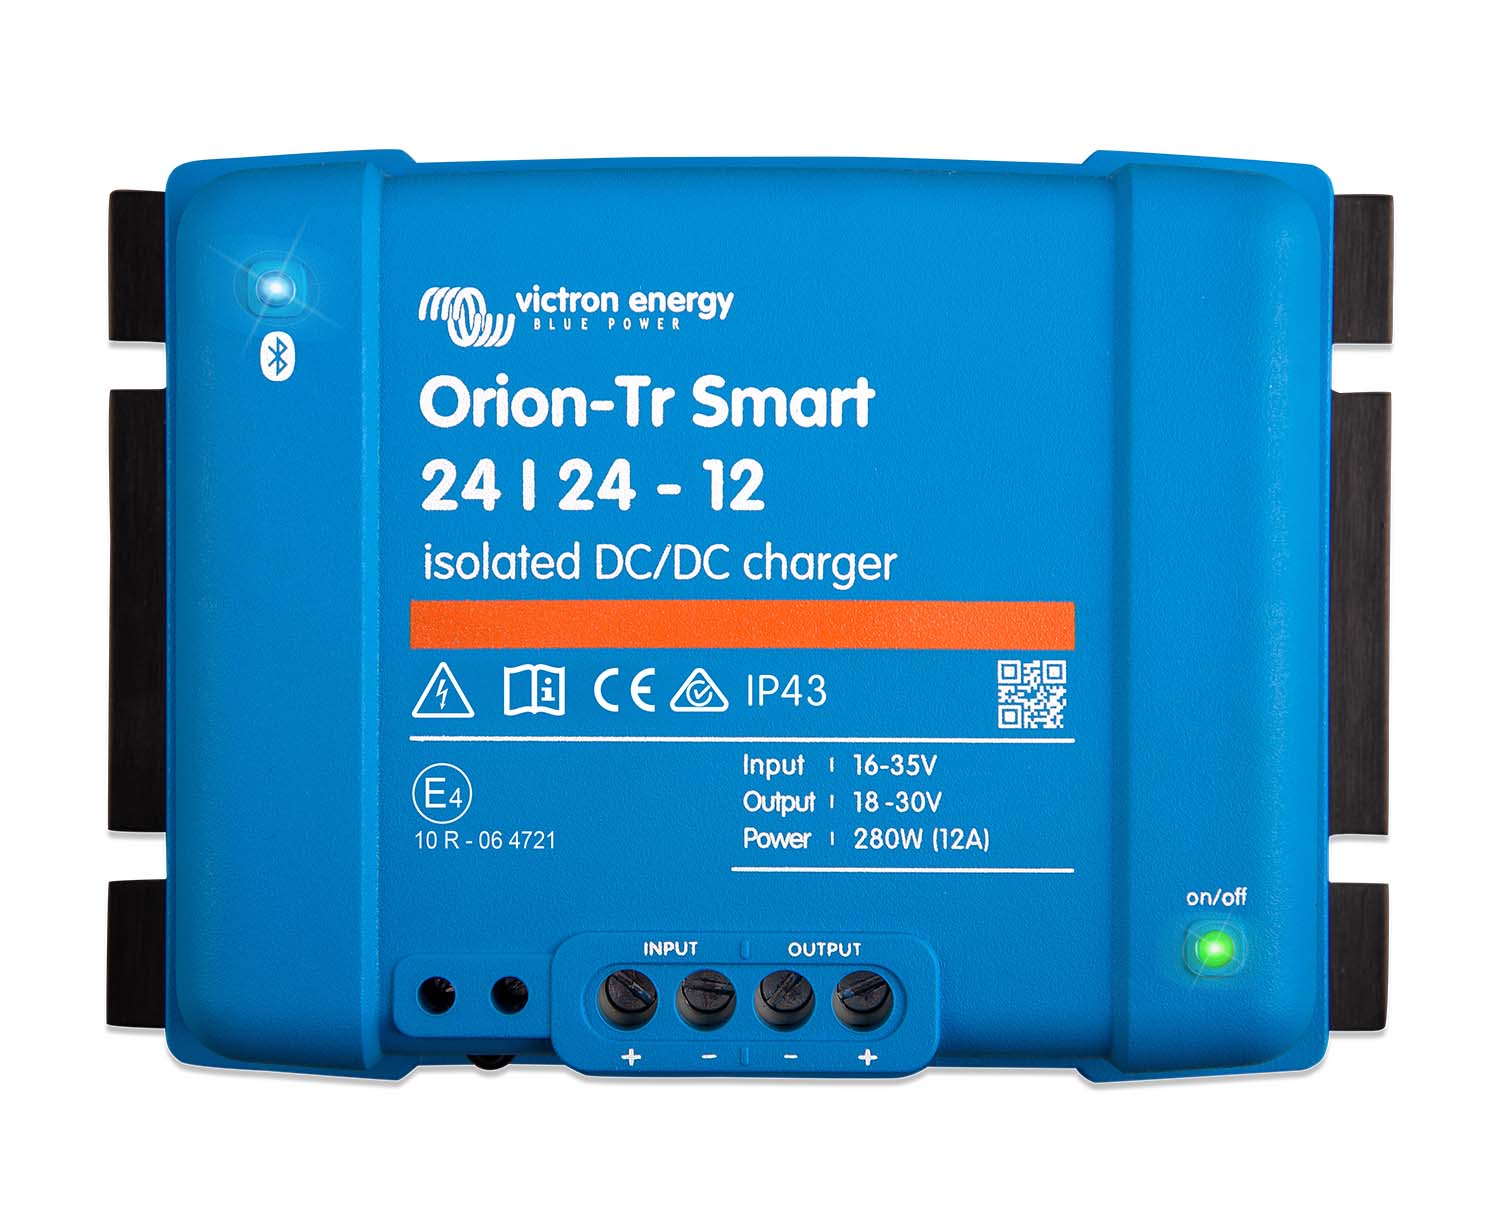 Smart DC-DC Ladewandler Victron Energy Orion-Tr 24/24-12A Isoliert